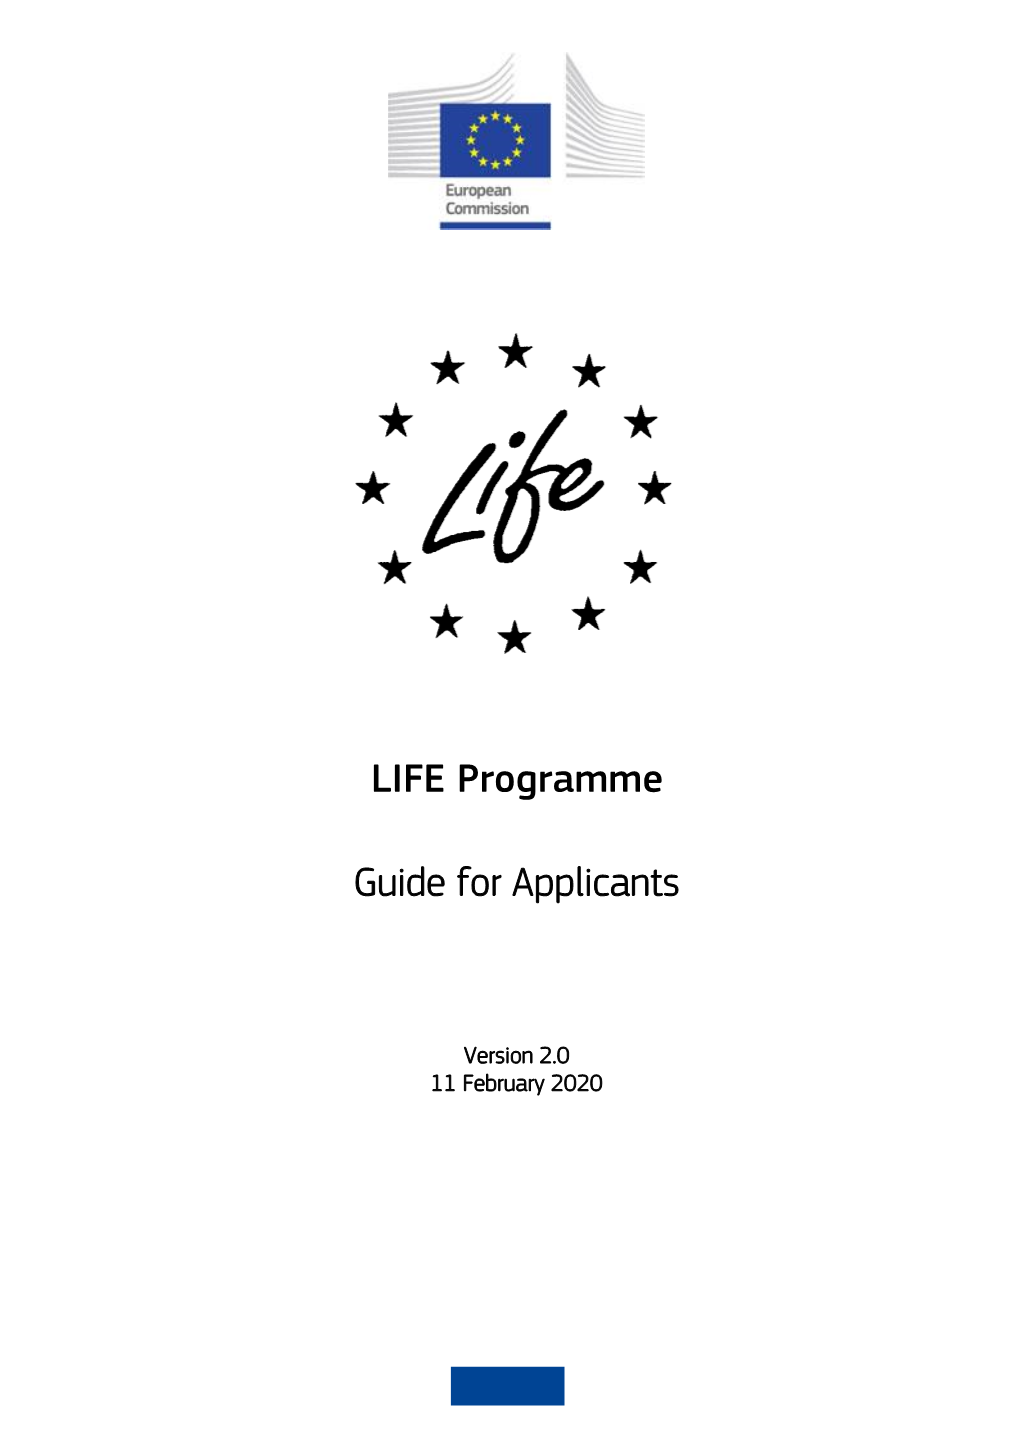 LIFE Programme Guide for Applicants